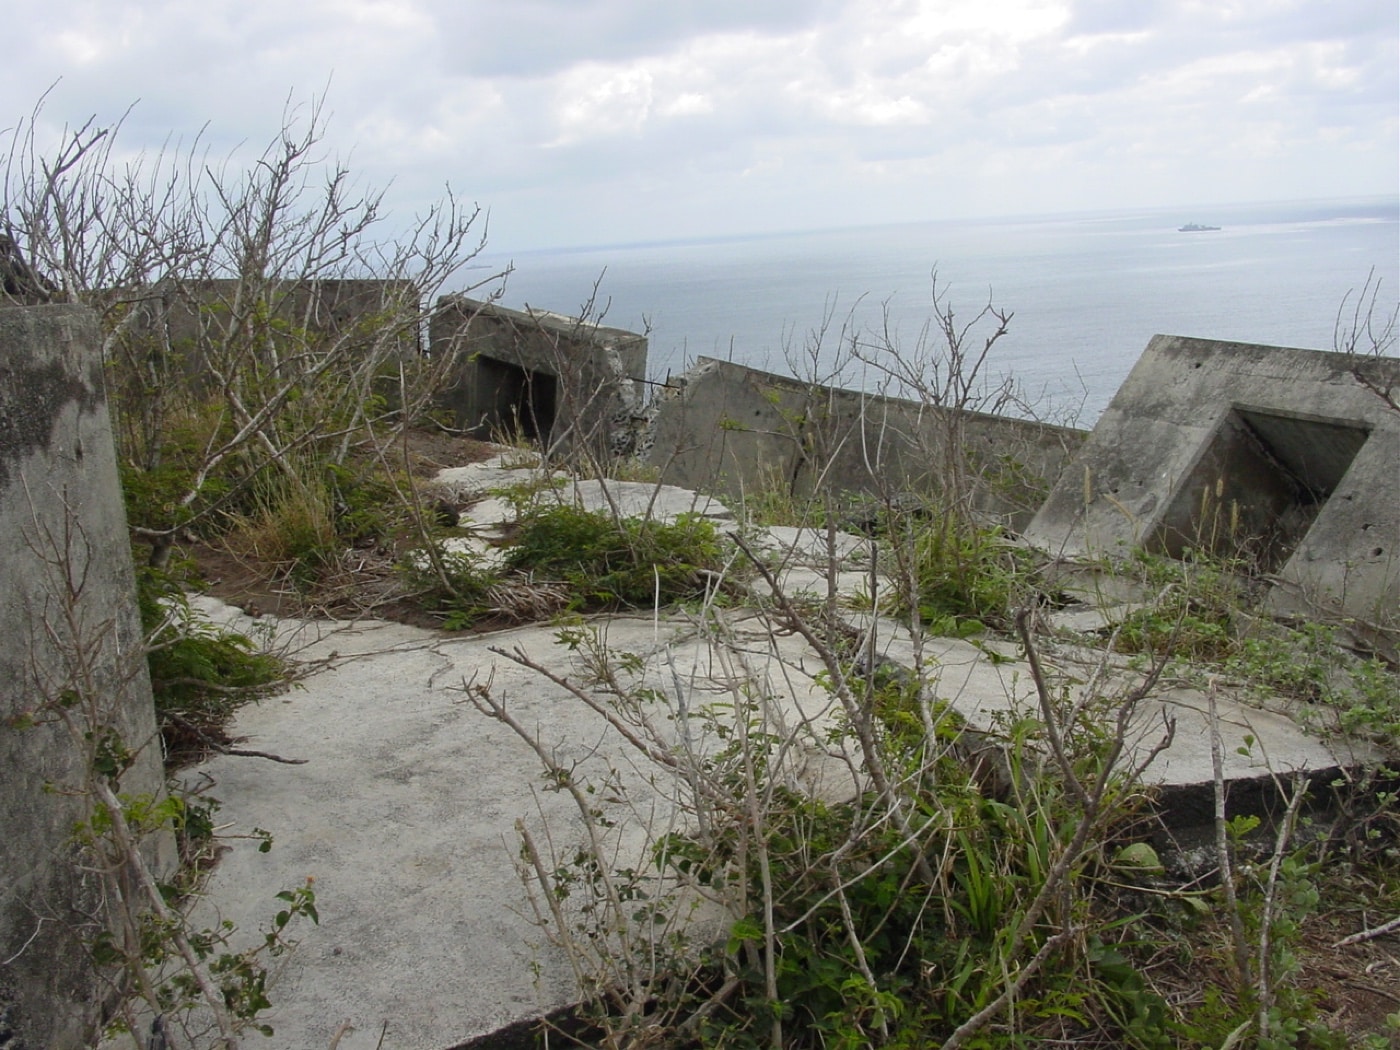 In this photograph we see reinforced concrete bunkers that were part of Iwo Jima even today. During the defense of Iwo Jima, these strongpoints made tough work for the Marines tasked with taking the island. Iwo Jima would claim the lives of thousands of US and Japanese men.